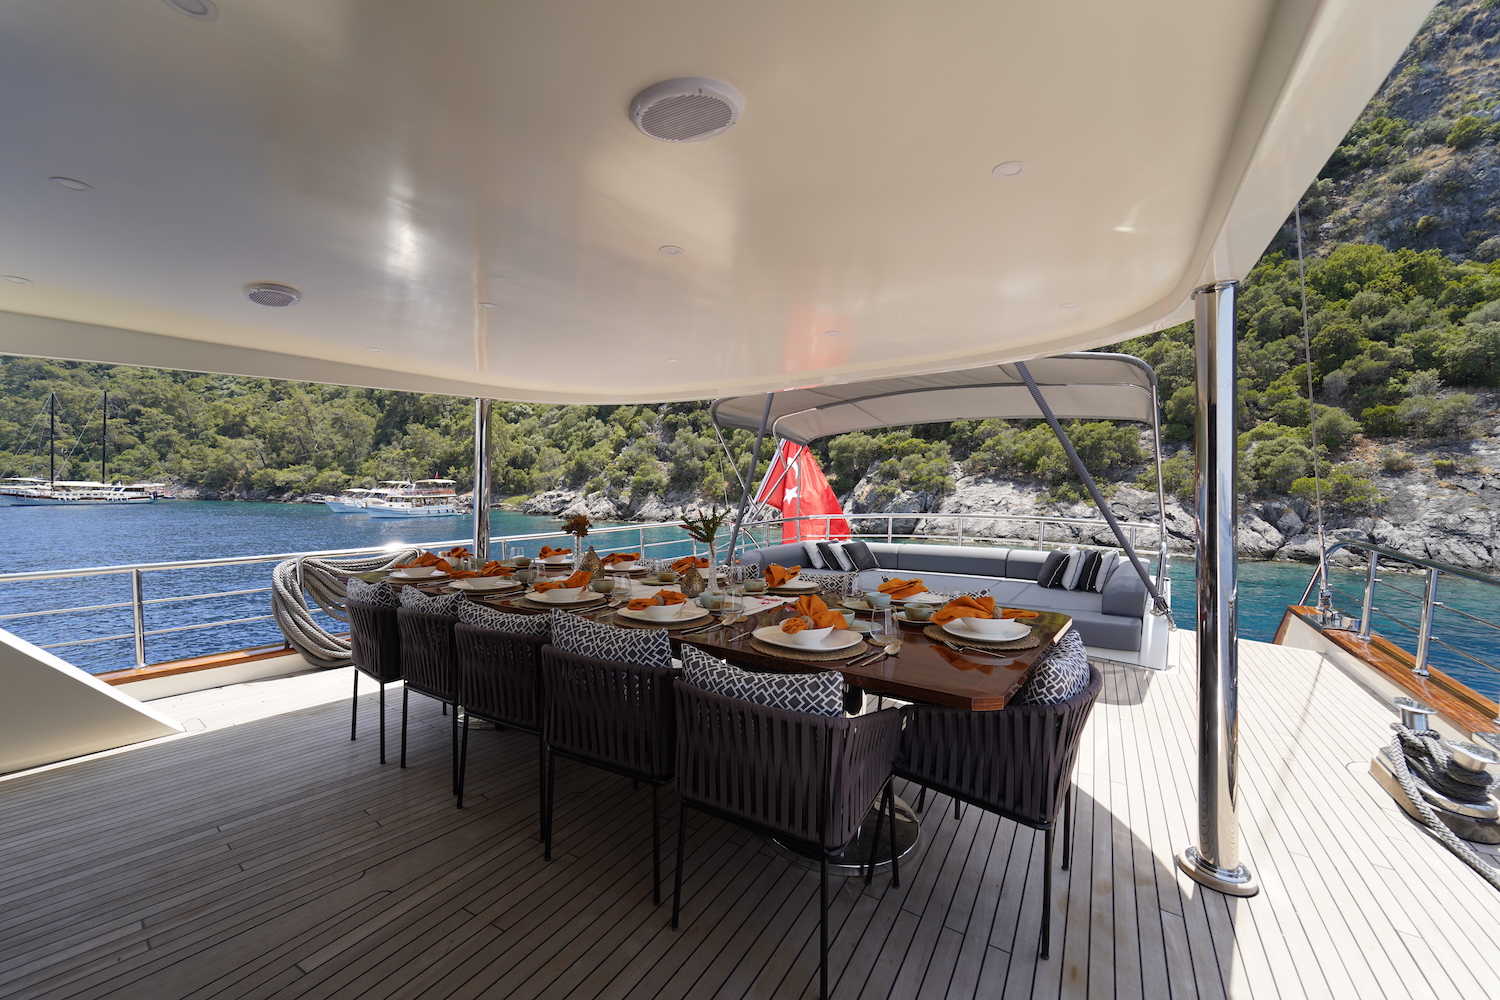 Aft Deck Alfresco Dining And Seating Area